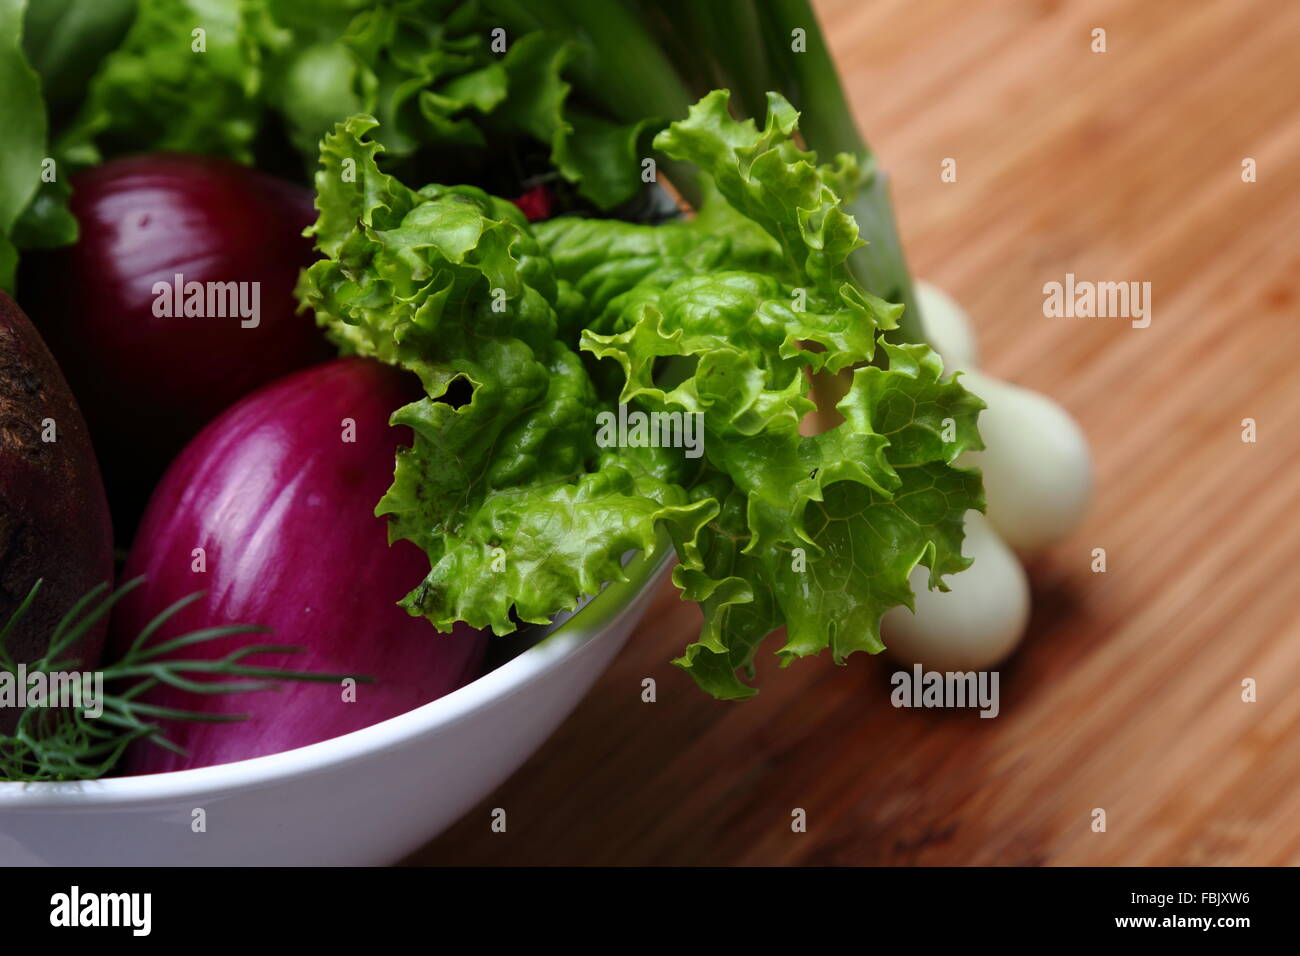 Onions and fresh herbs as dietary and health Stock Photo